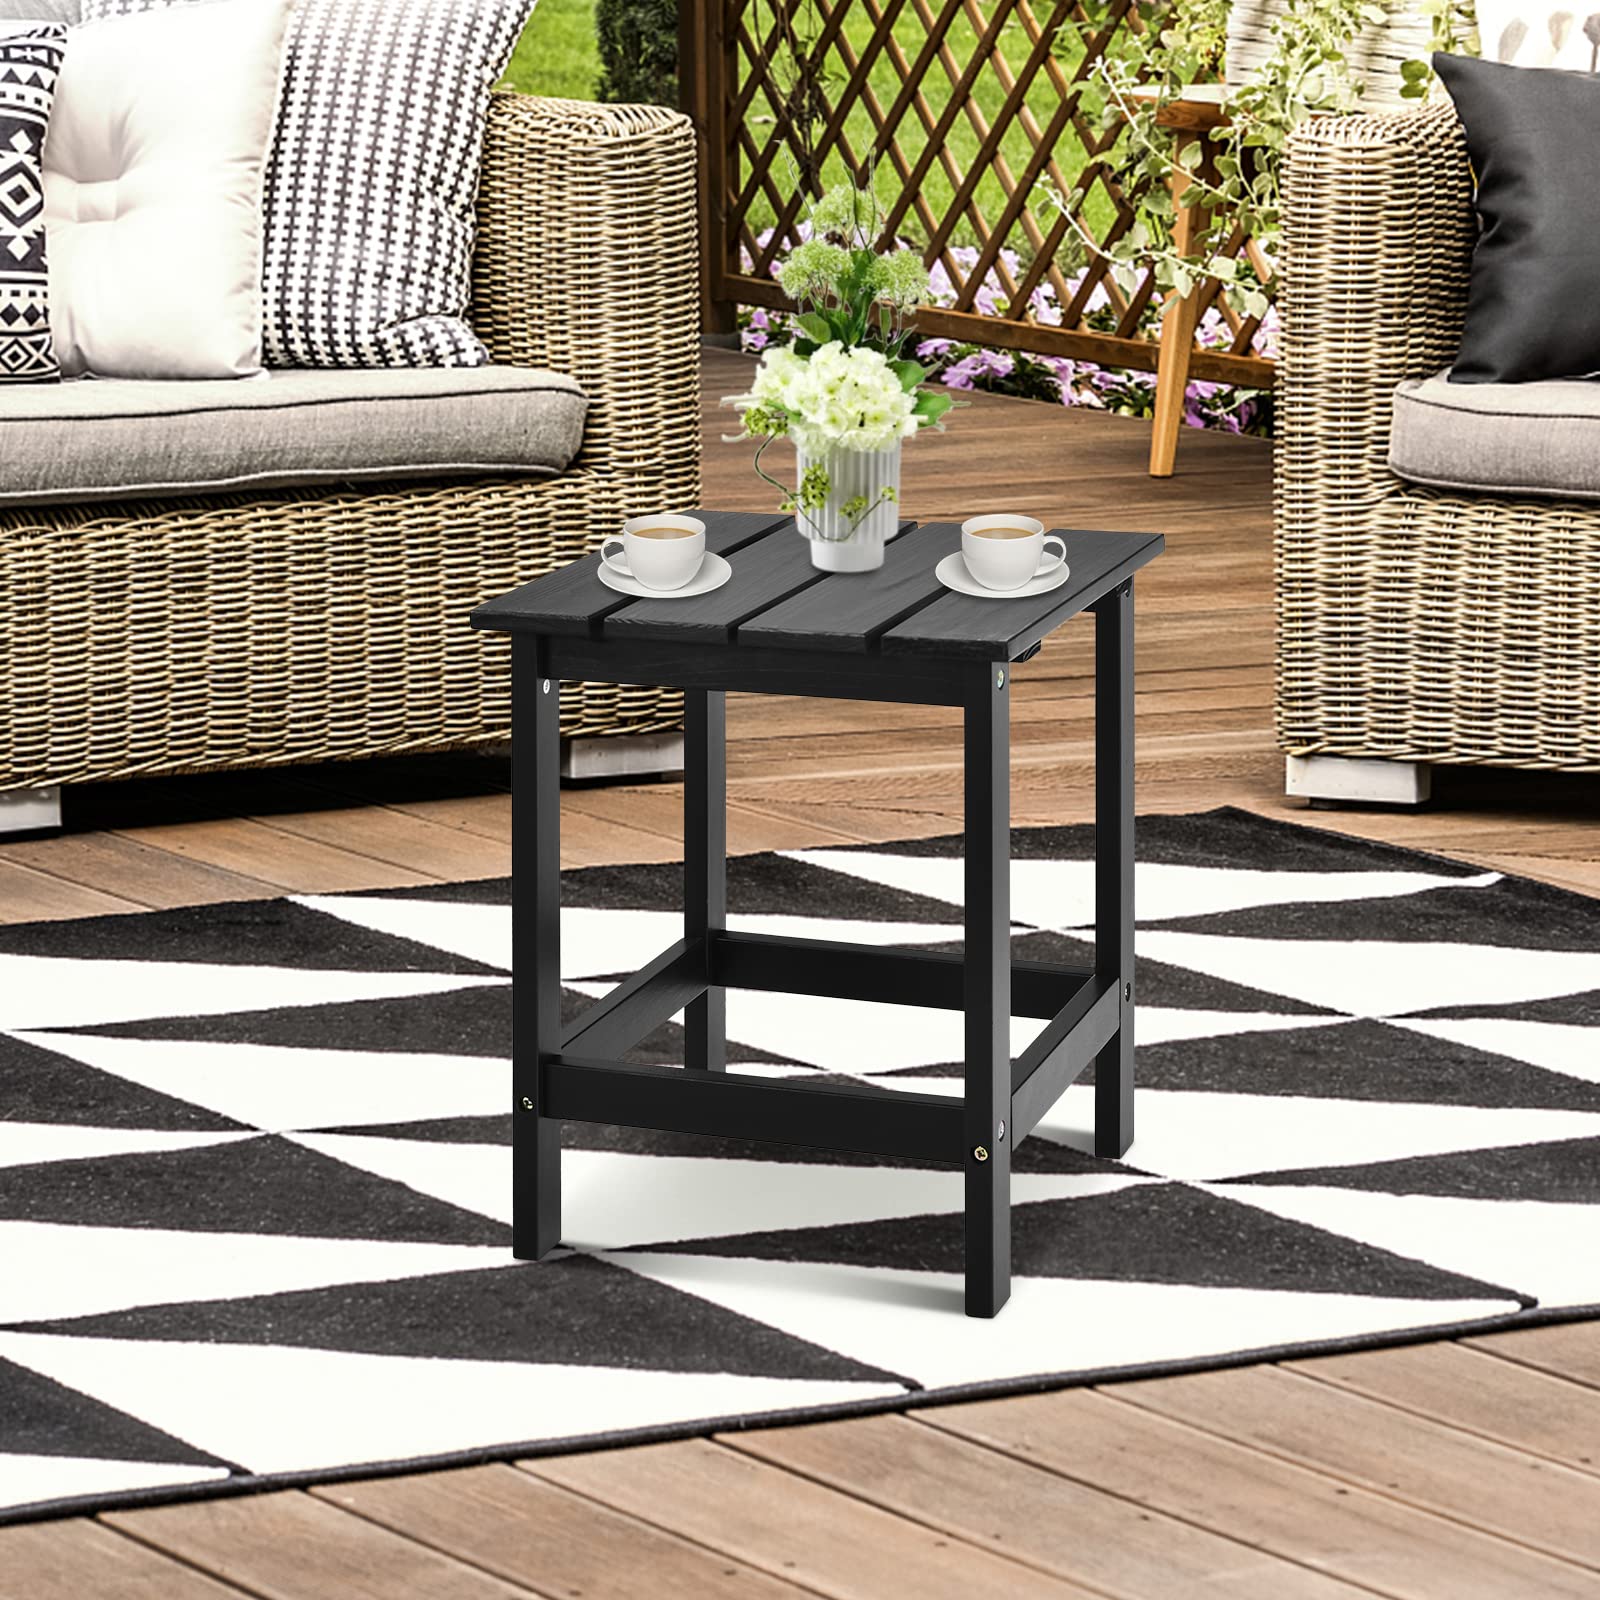 Outdoor Side Table, 15 Square Wood End Table with Slatted Design